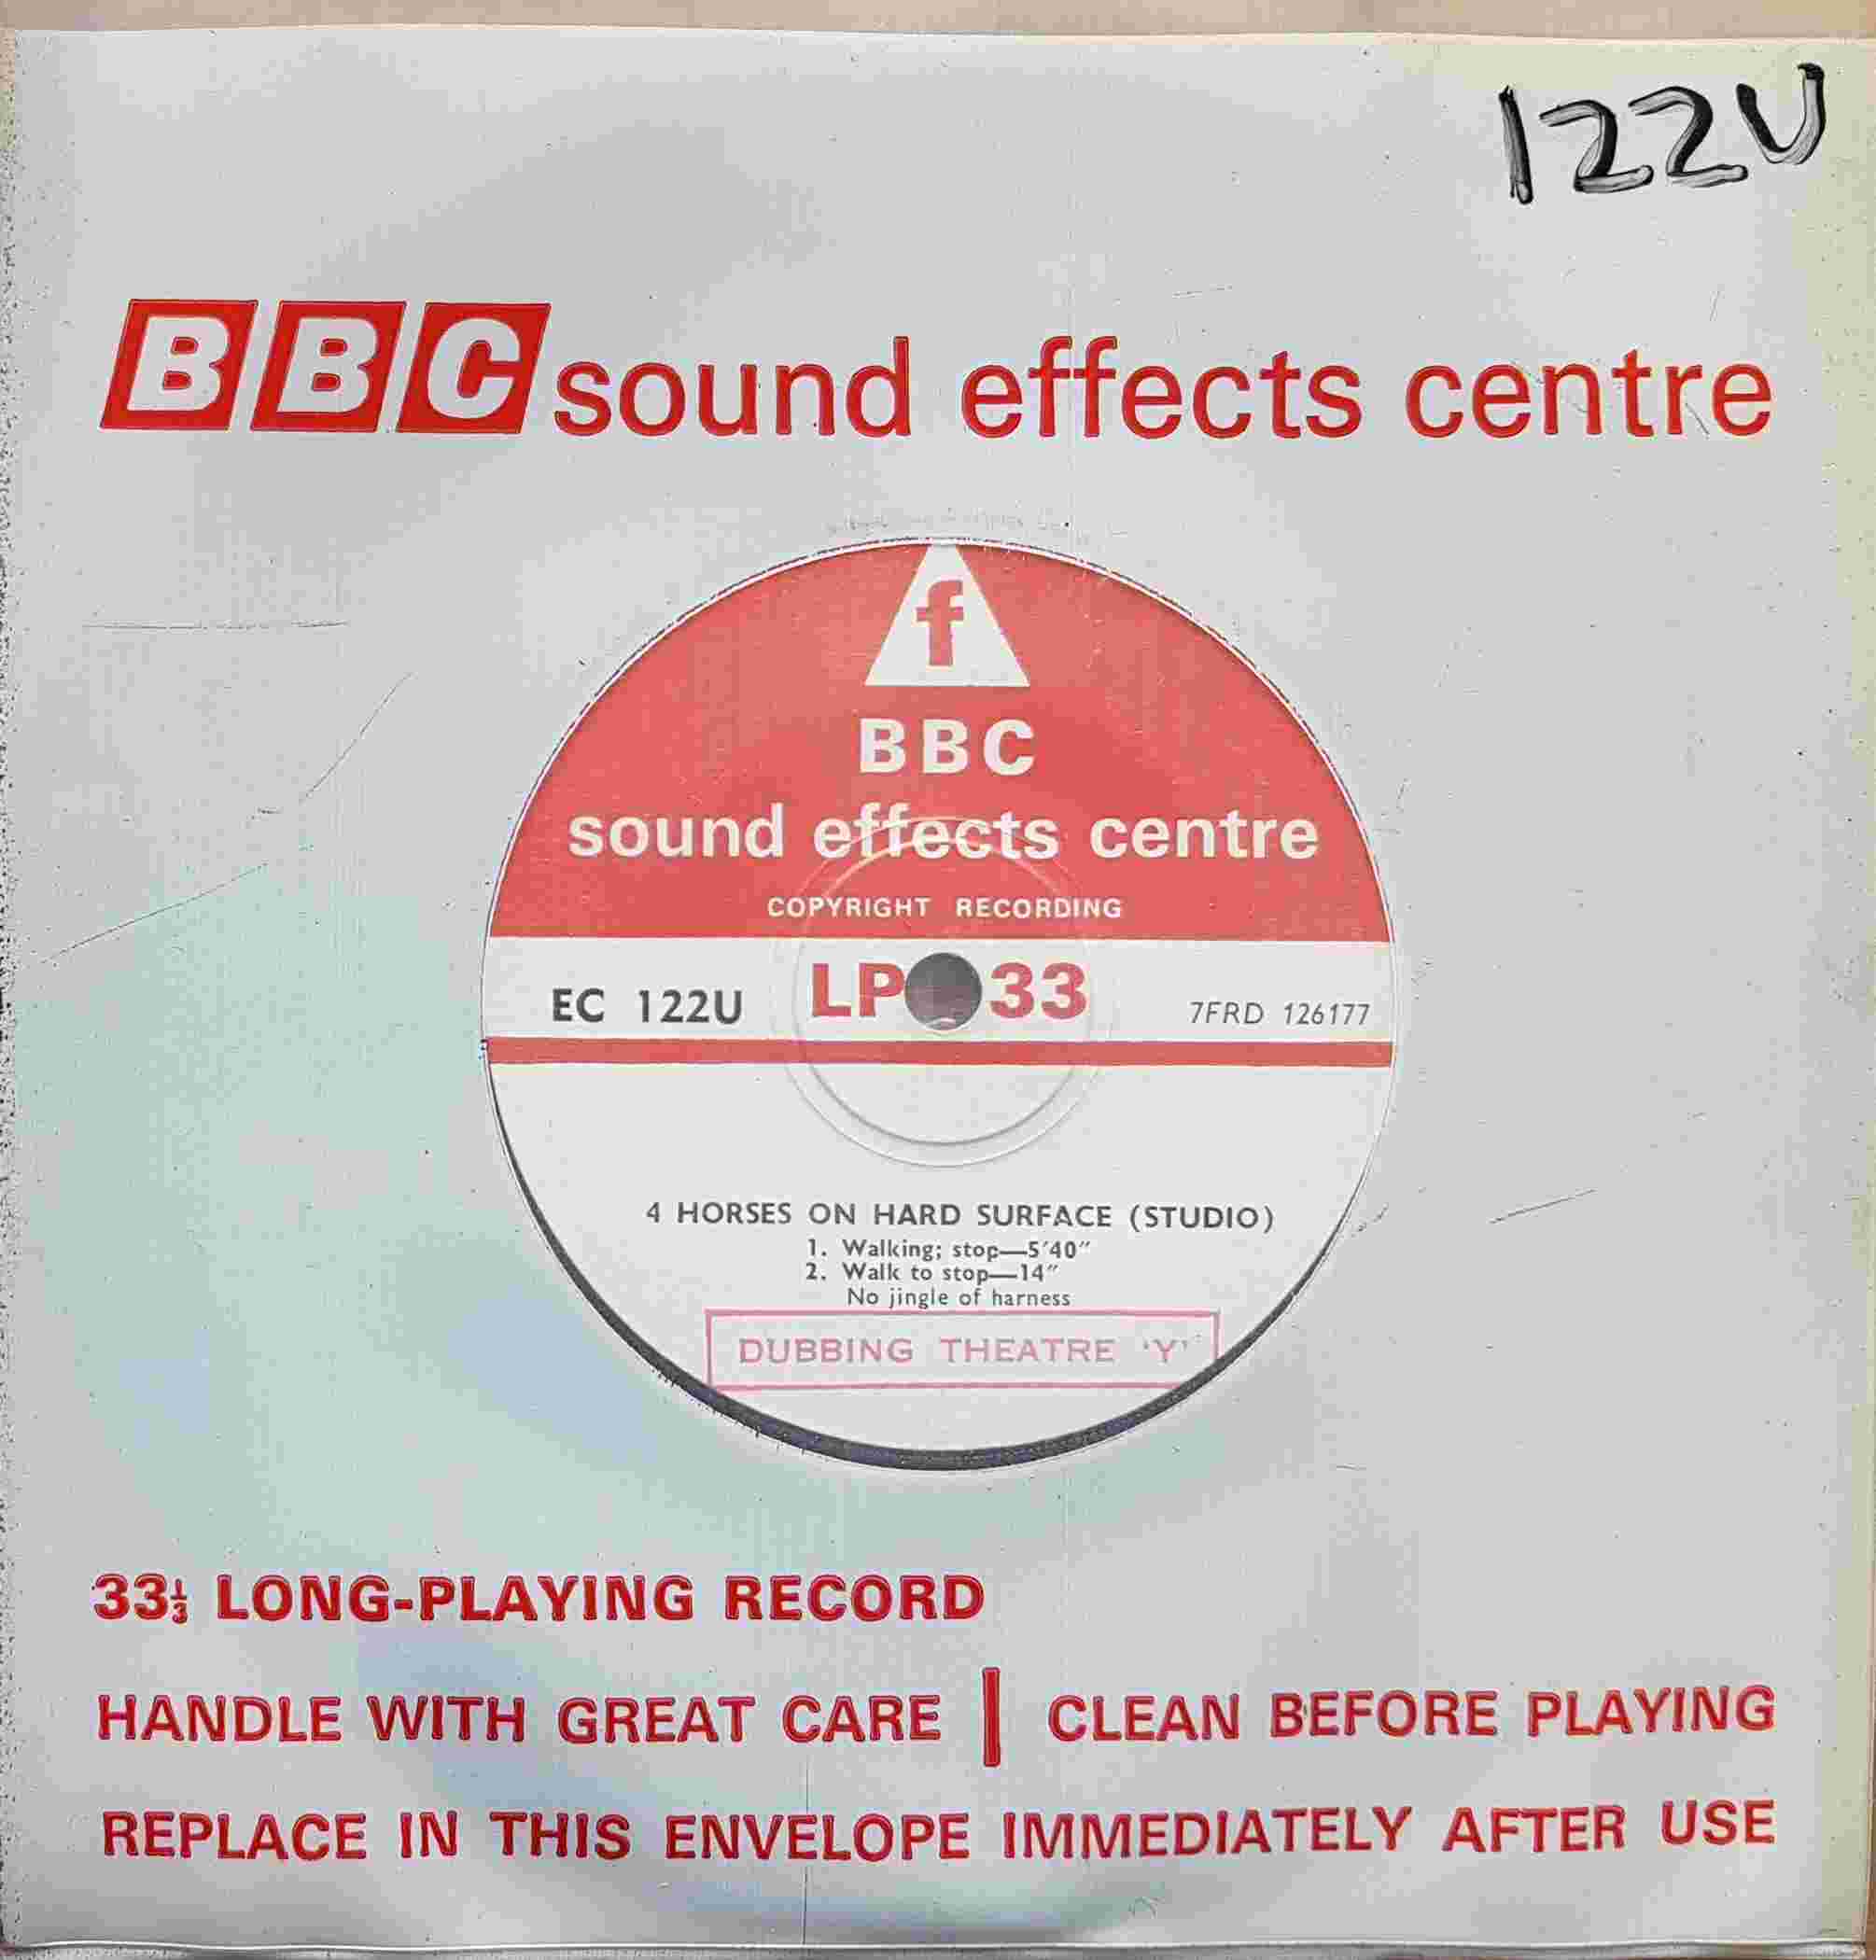 Picture of EC 122U 4 horses on hard surface (Studio) by artist Not registered from the BBC singles - Records and Tapes library